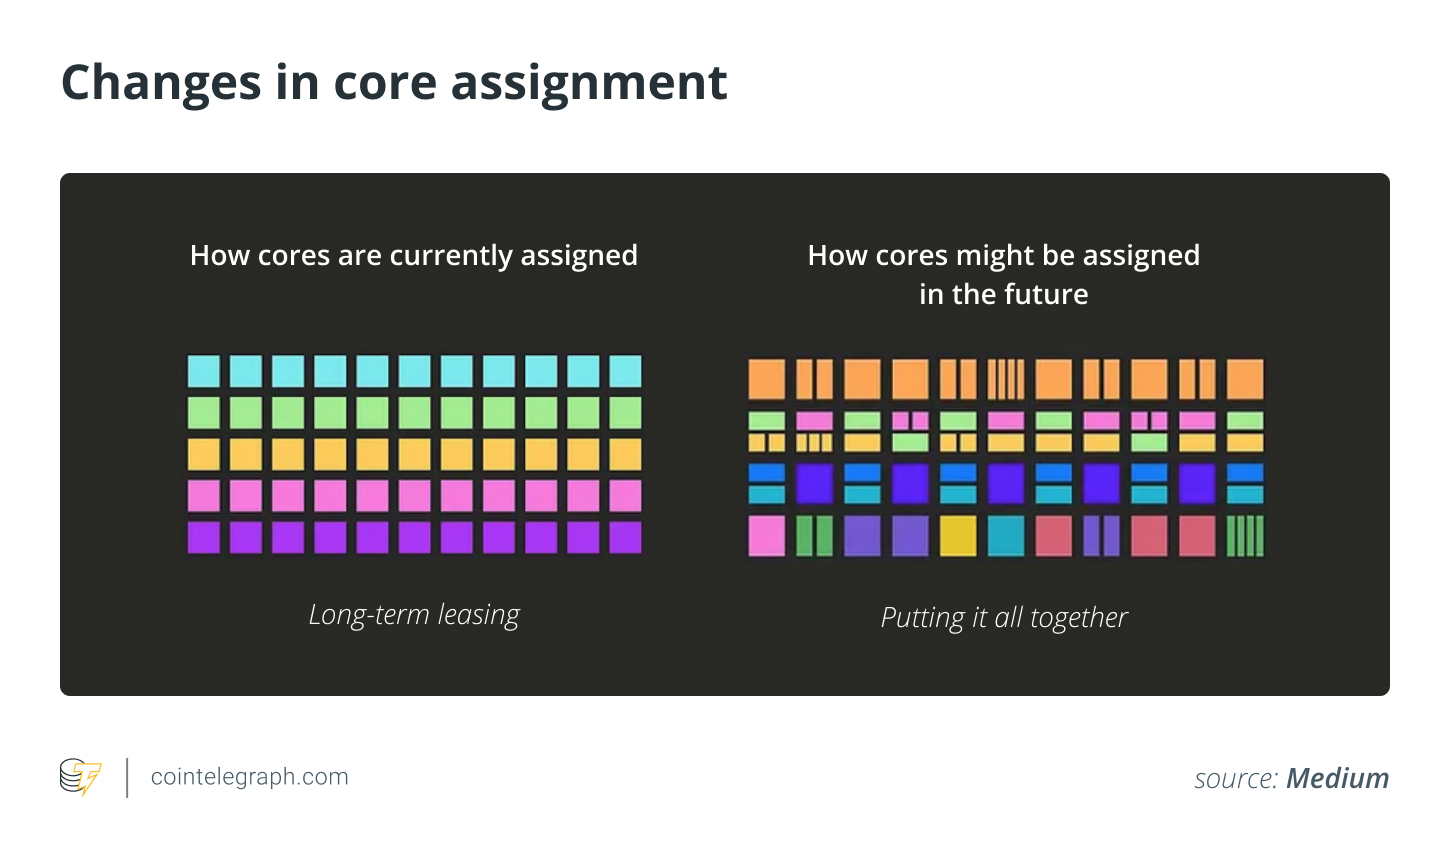 Changes in core assignment